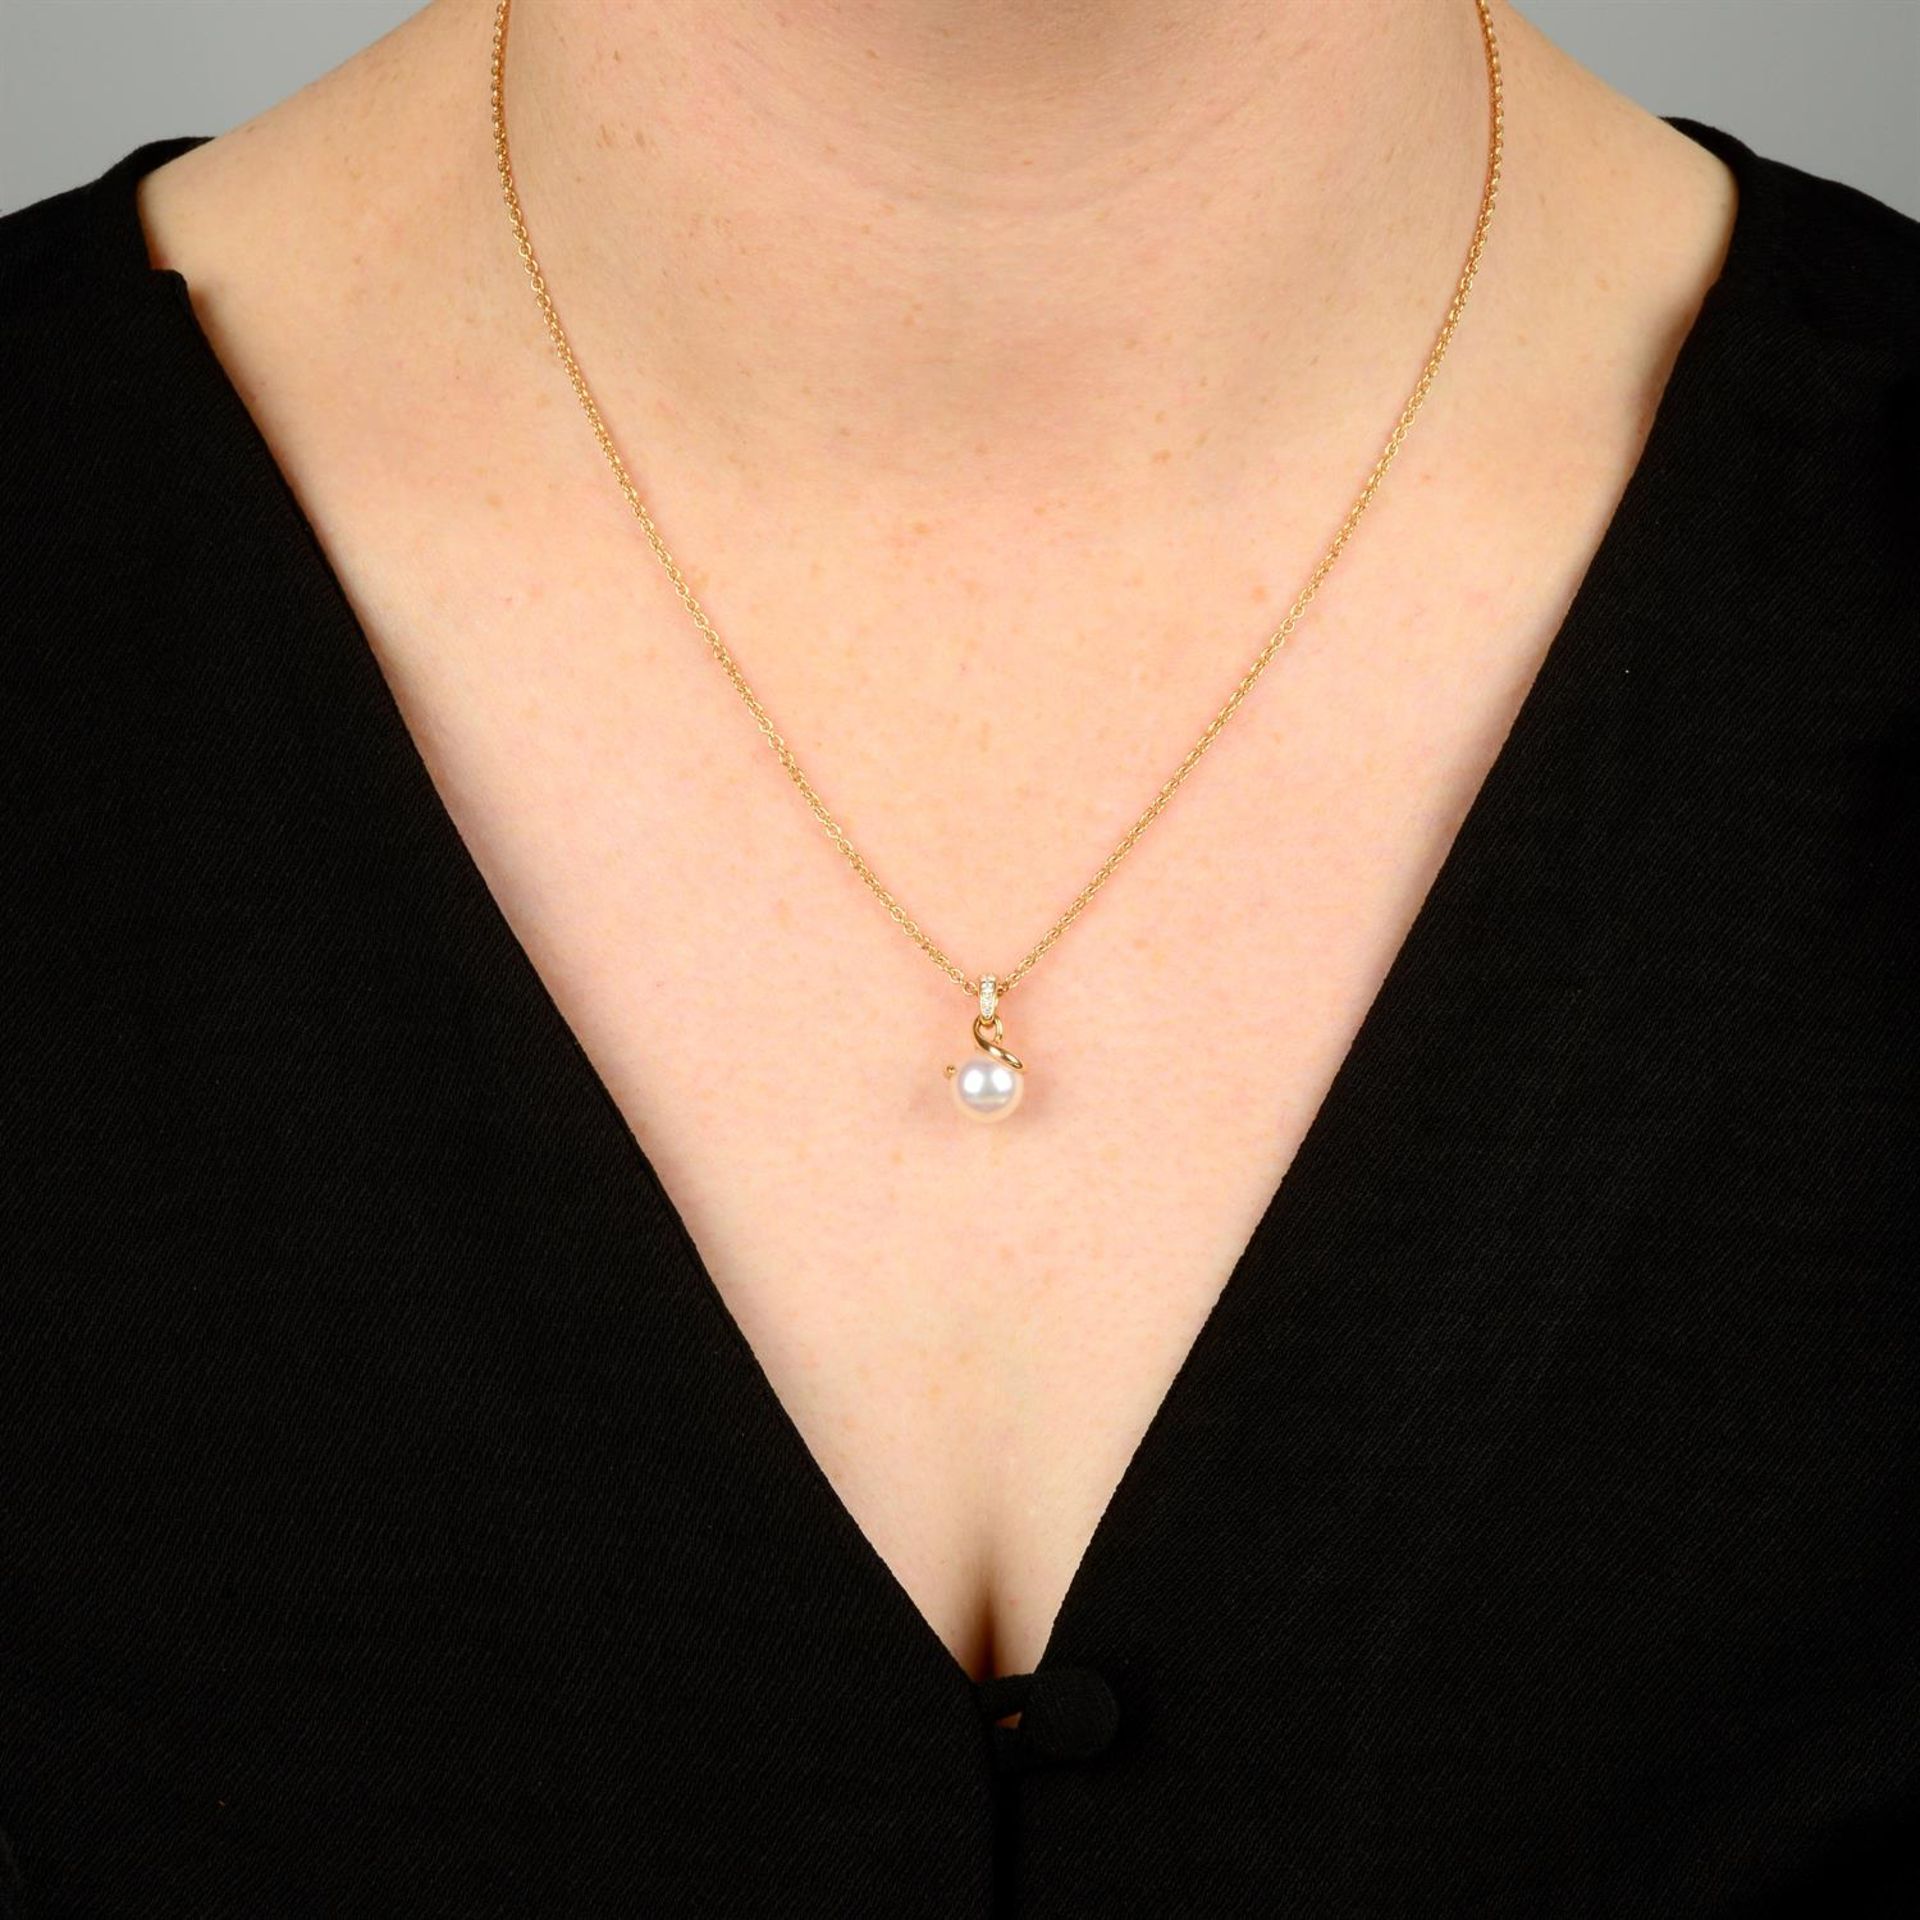 An 18ct gold Akoya cultured pearl and pavé-set diamond 'Twist' pendant, with chain, by Mikimoto. - Image 5 of 5